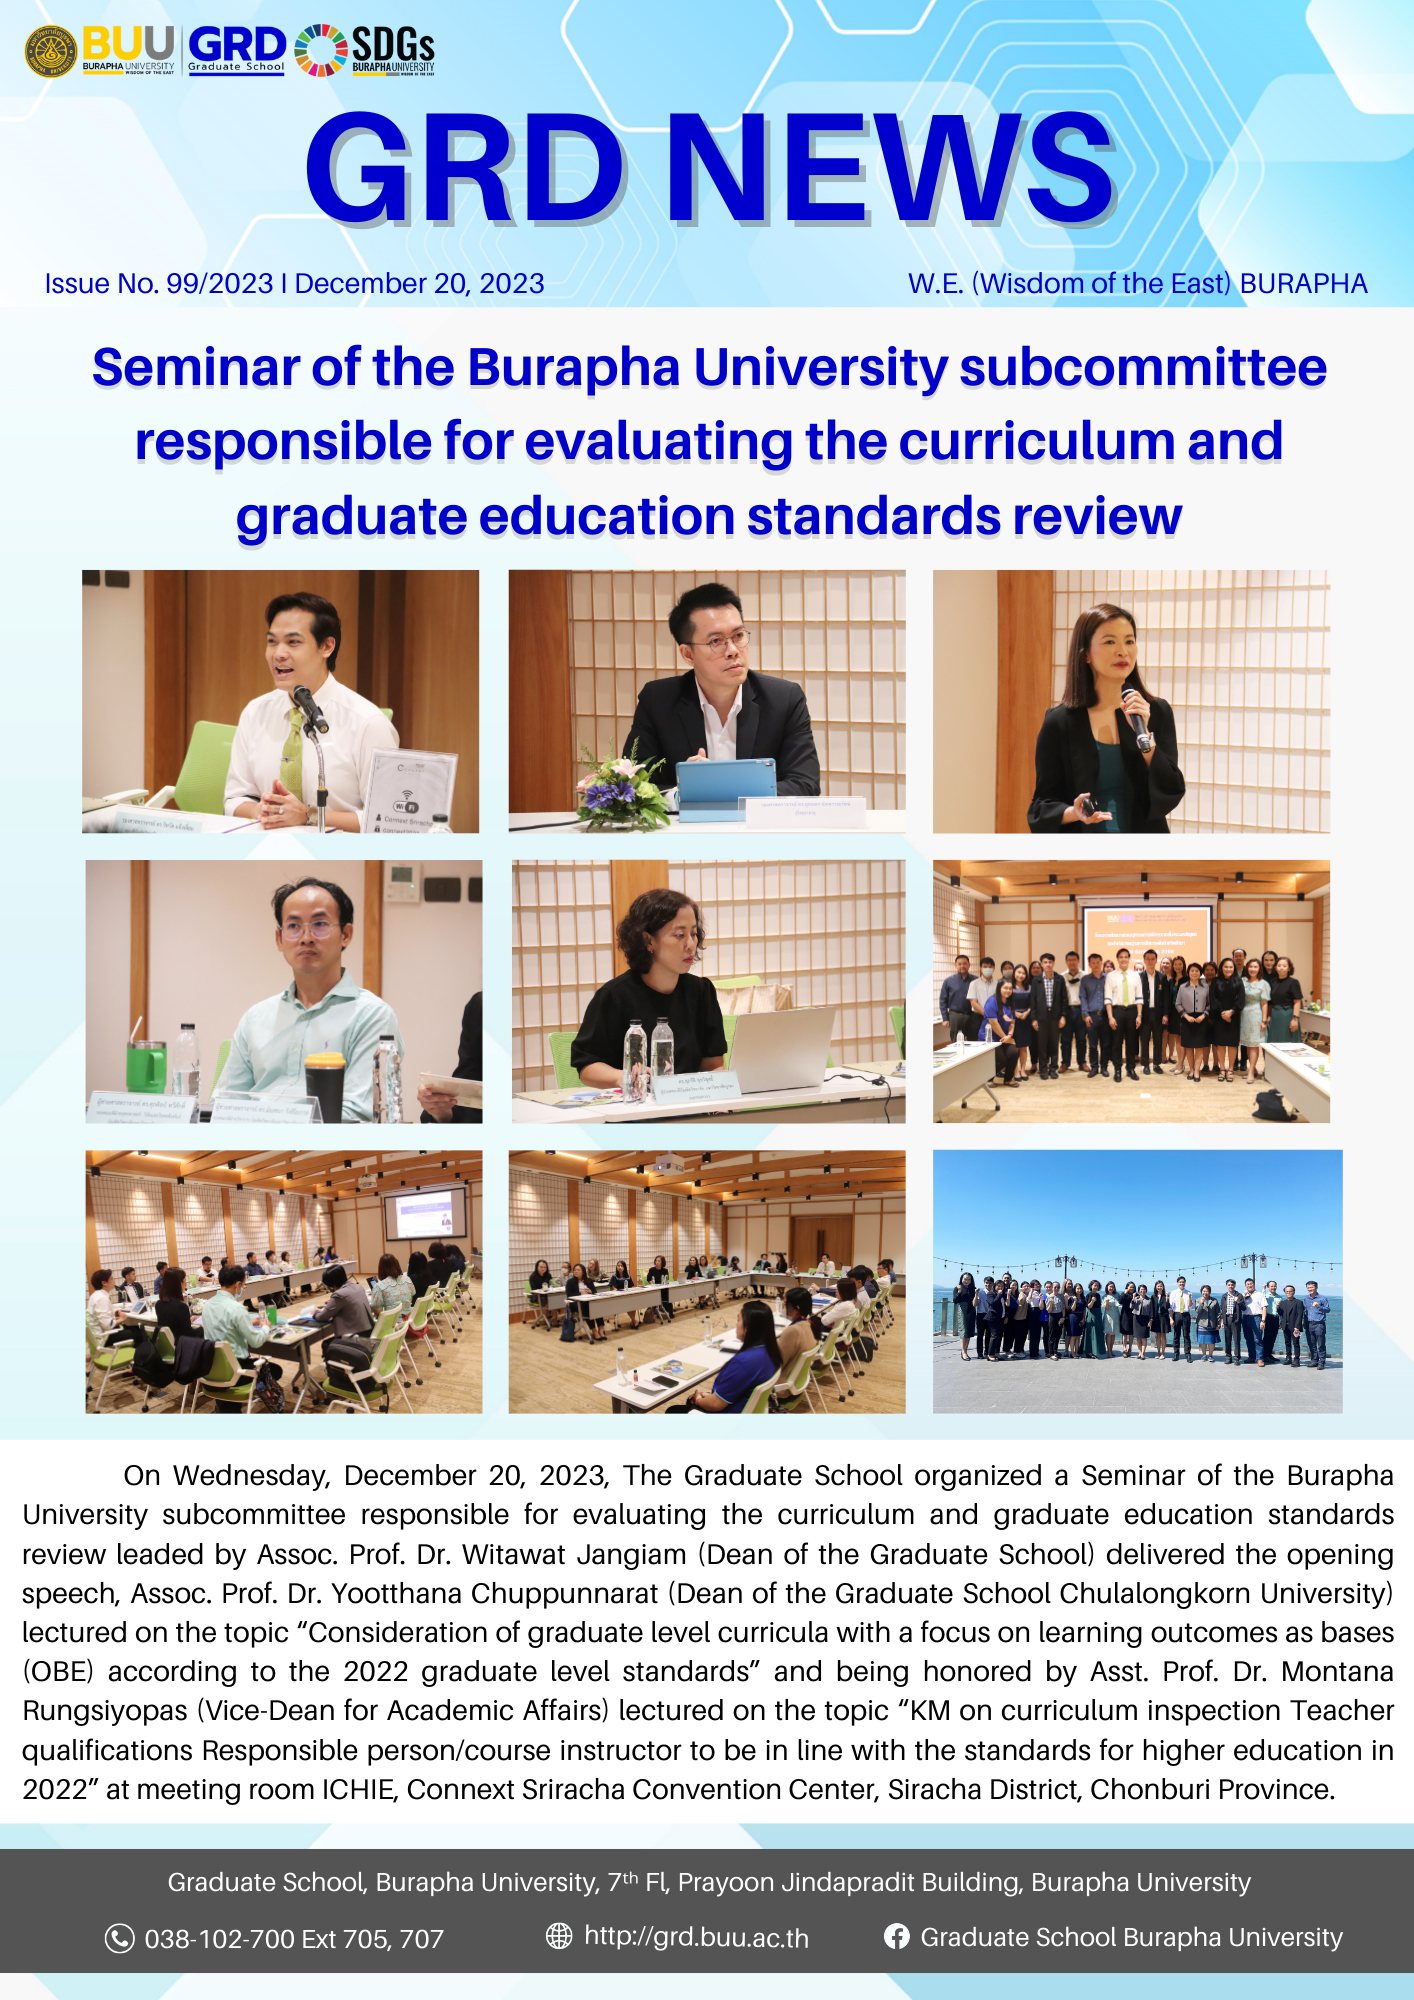 Seminar of the Burapha University subcommittee responsible for evaluating the curriculum and graduate education standards review